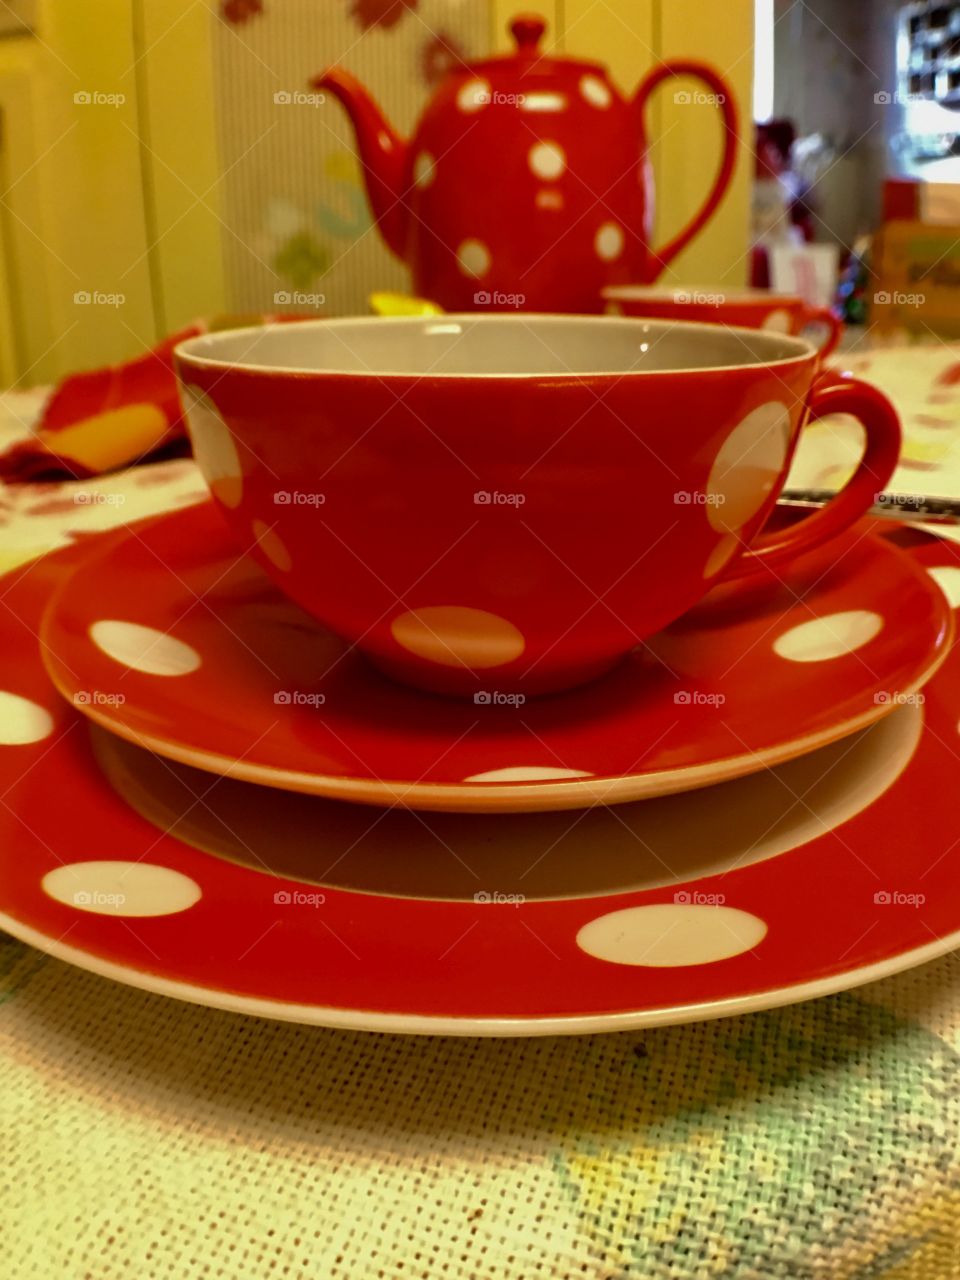 Red polkadot vintage or retro teapot, cup and saucer. 